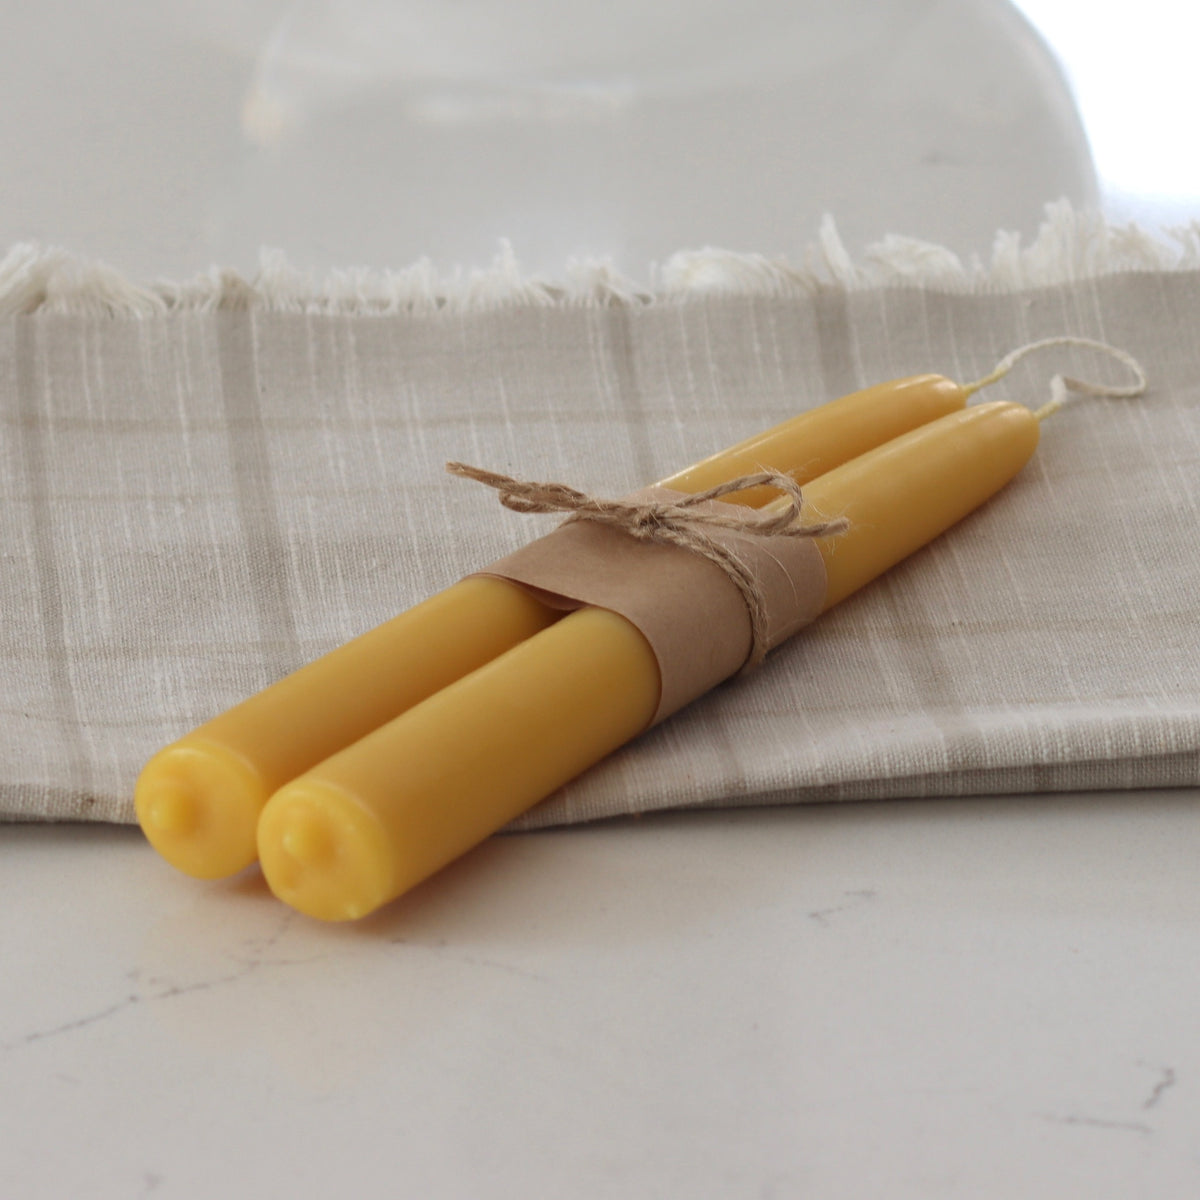 Taper Beeswax Candles - Gift Set of 2 - Five Bees Yard